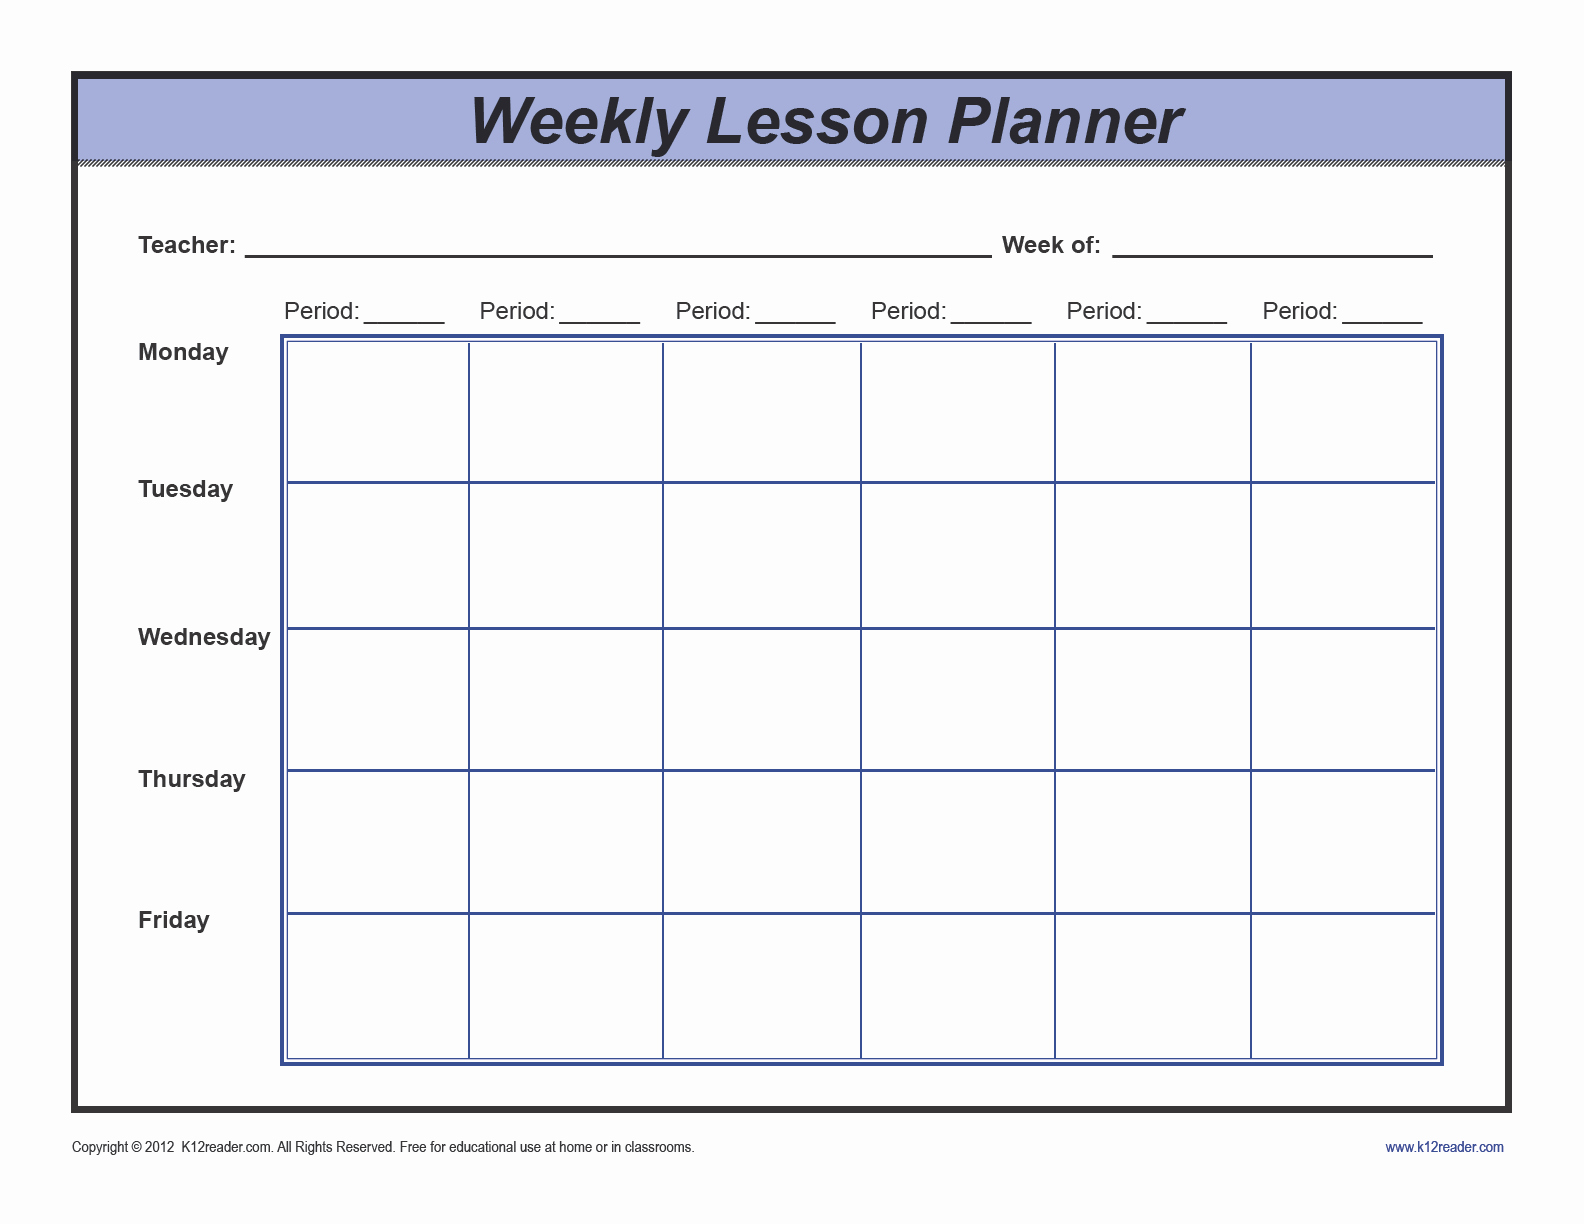 Weekly Lesson Plan Template Best Of Download Weekly Lesson Plan Template Preschool